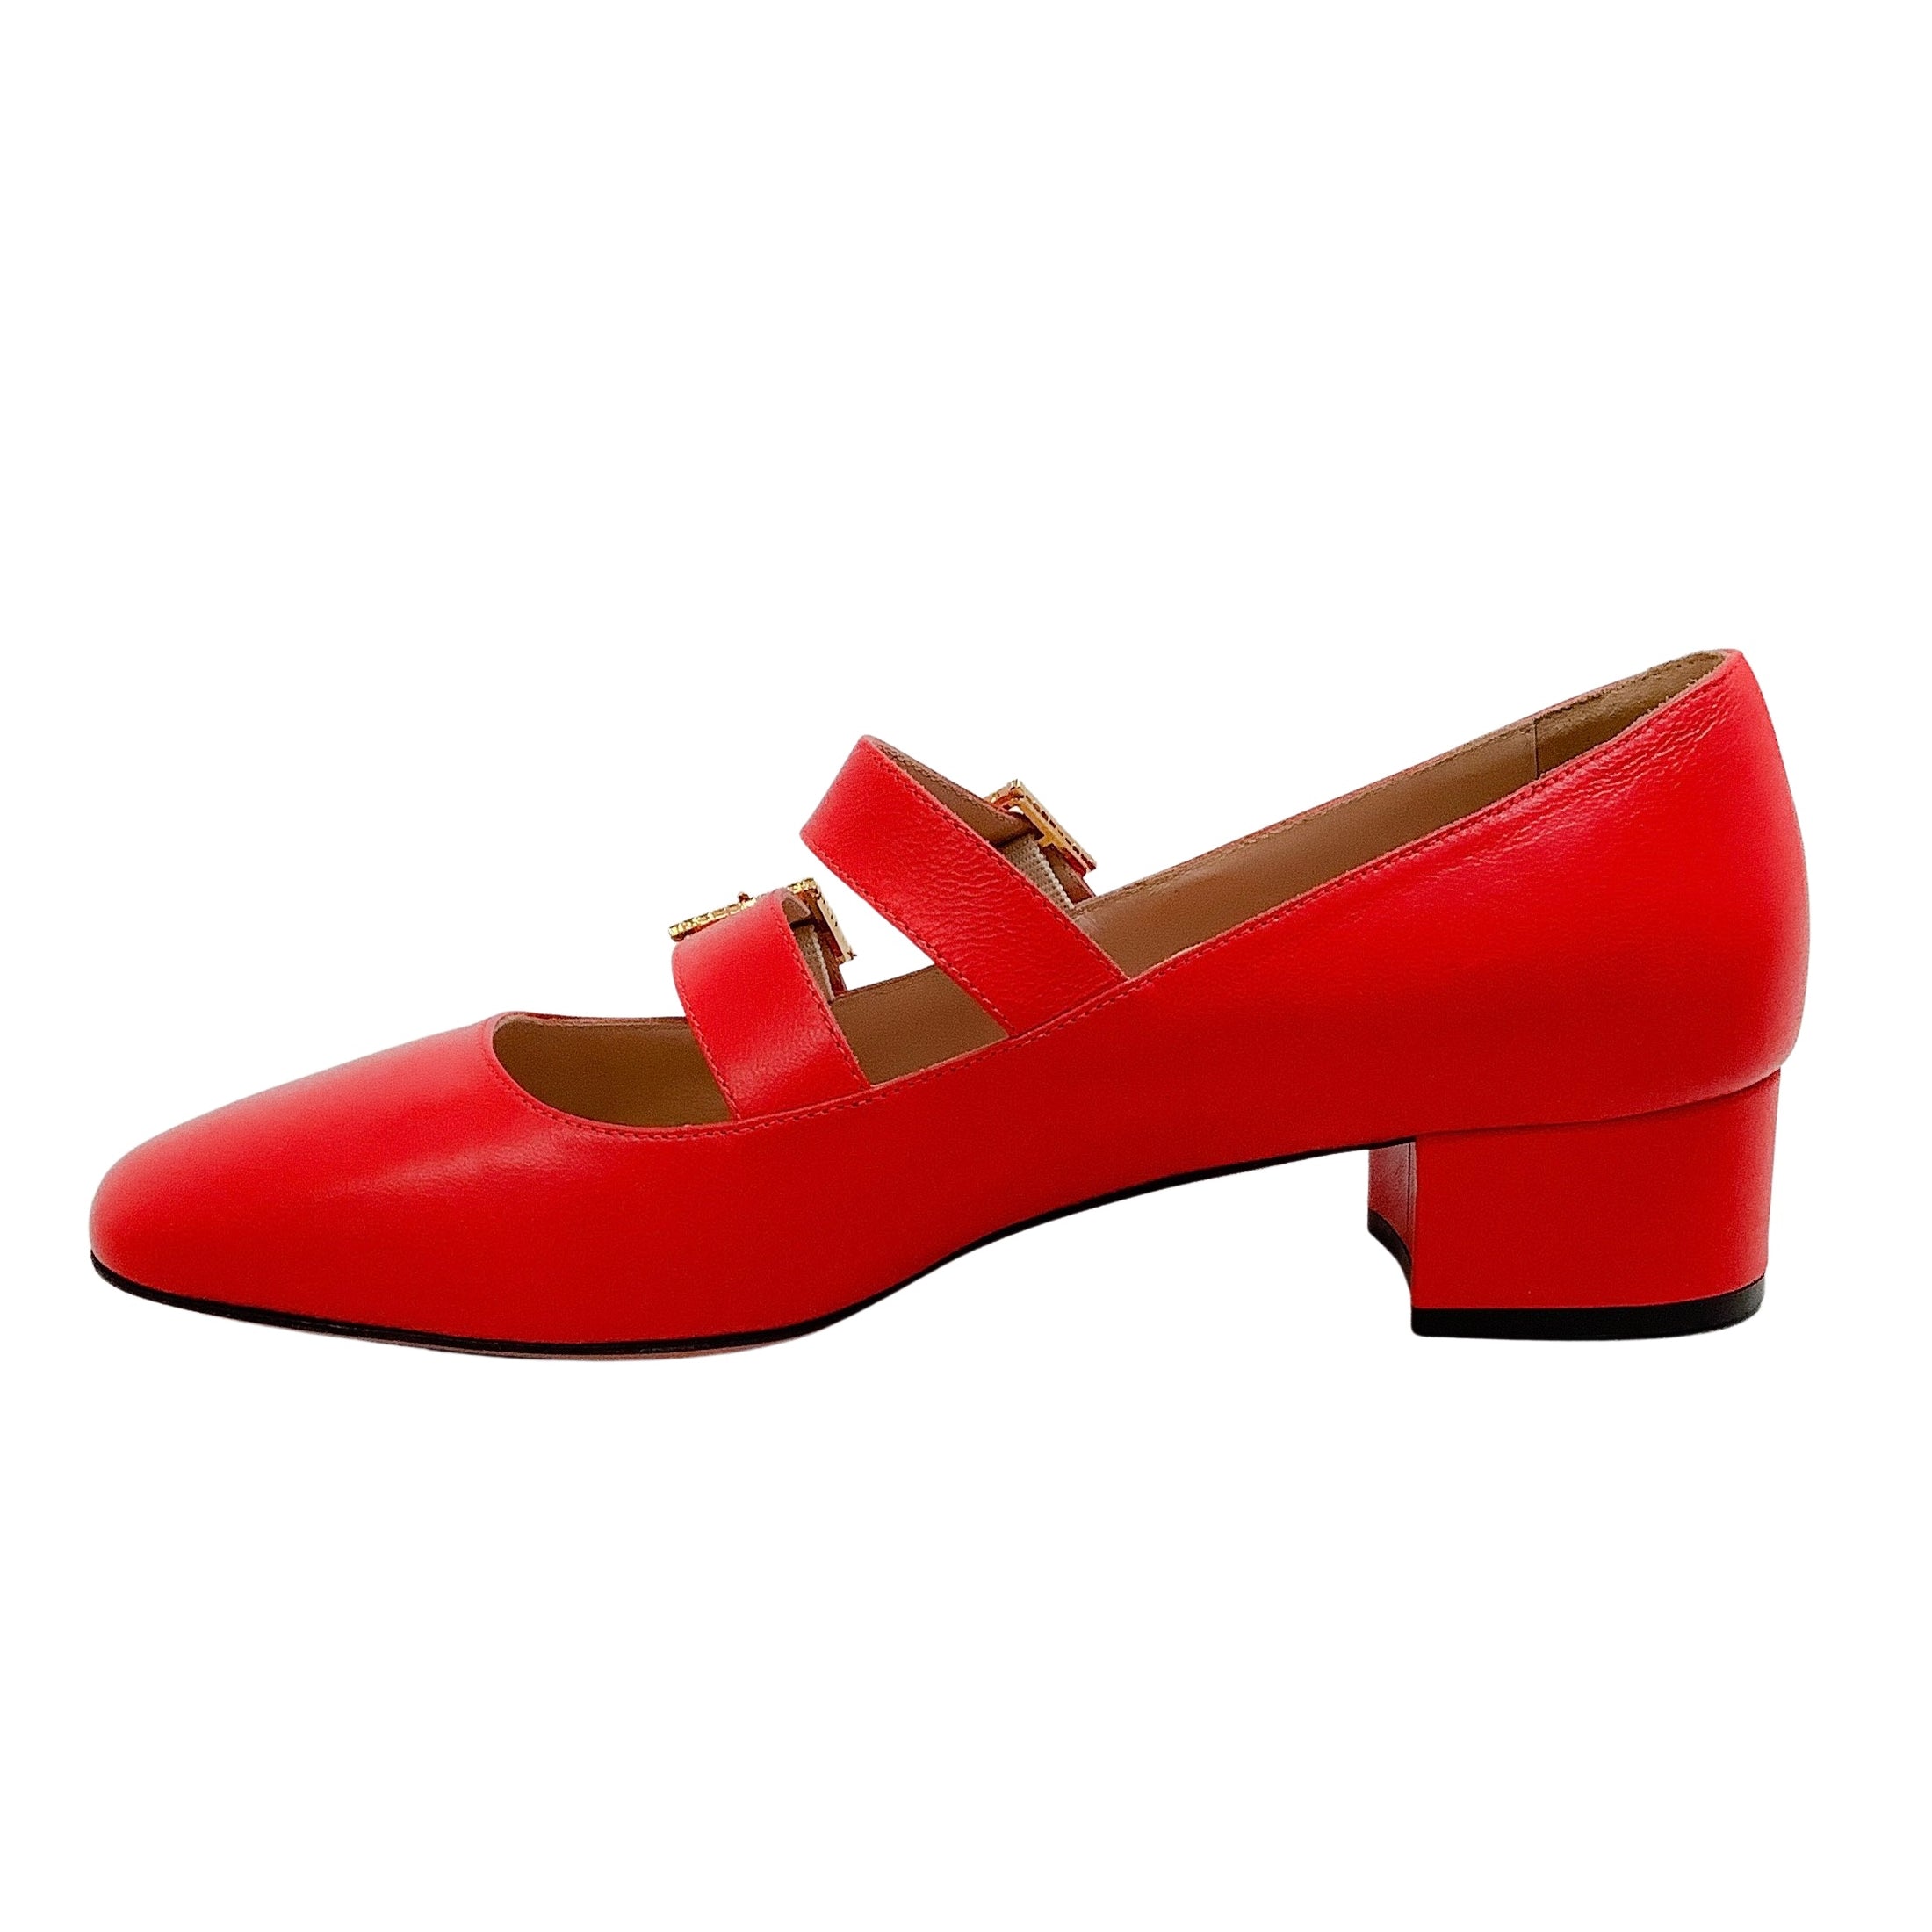 Vivetta Red Leather Double Strap Mary Jane Pumps with Crystal Buckles